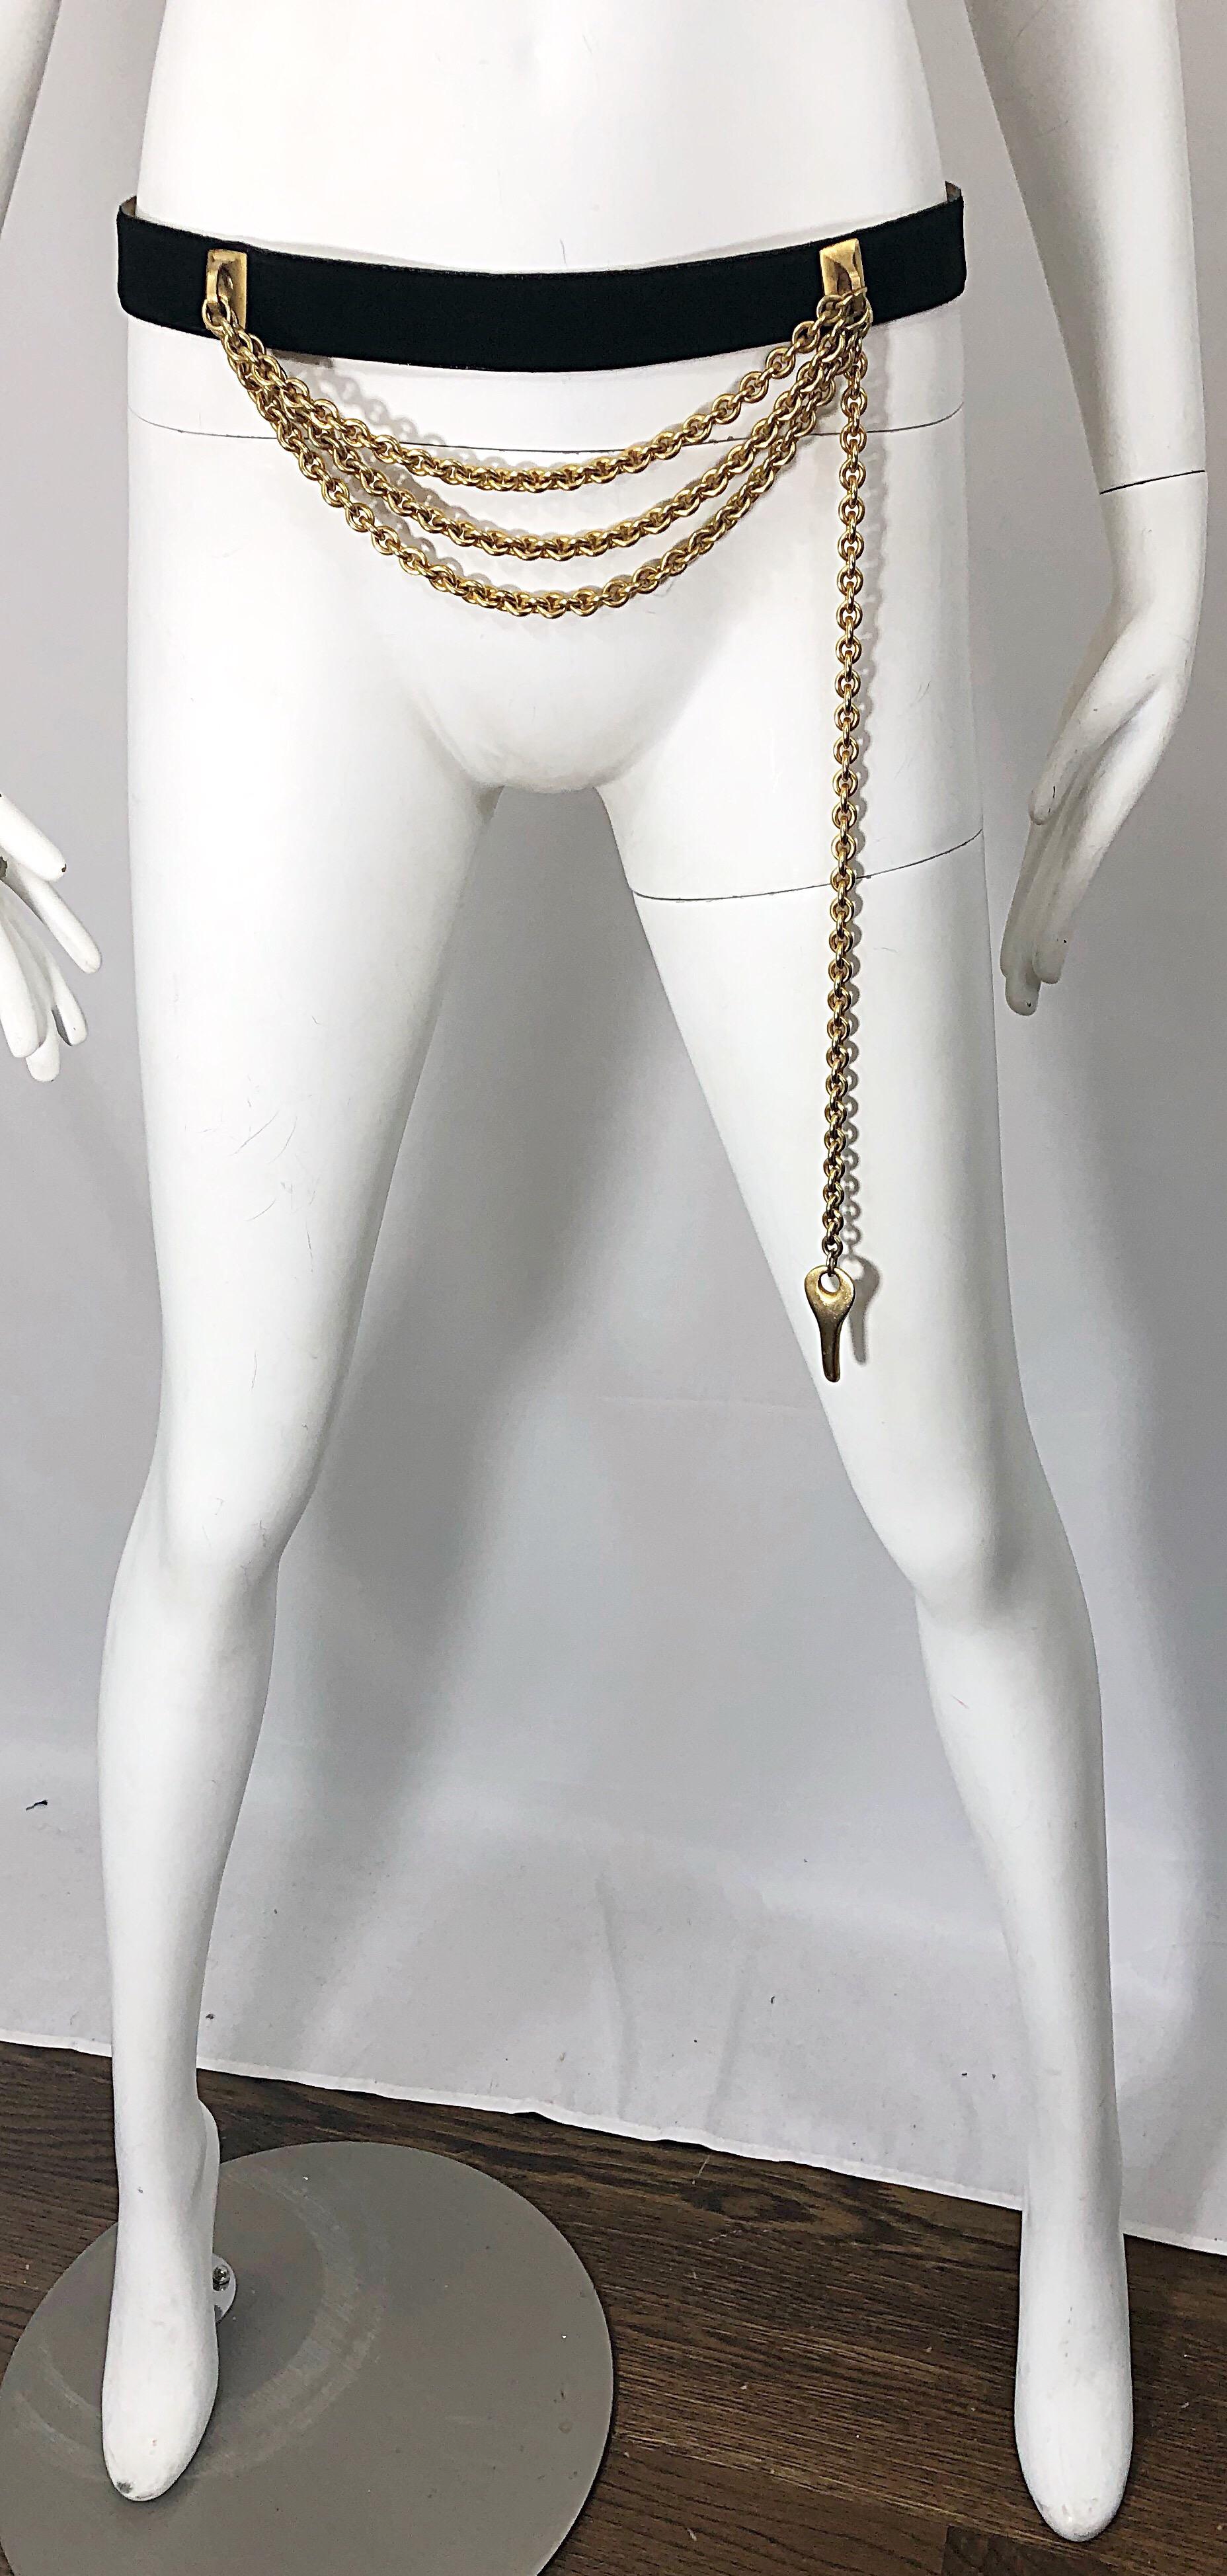 Chic early 90s DONNA KARAN black leather suede and gold chain key belt! Features a medium width belt that has three levels of chains across the front middle. Long key pendant can be worn hanging, or can loop into one of the metal slots (as seen in